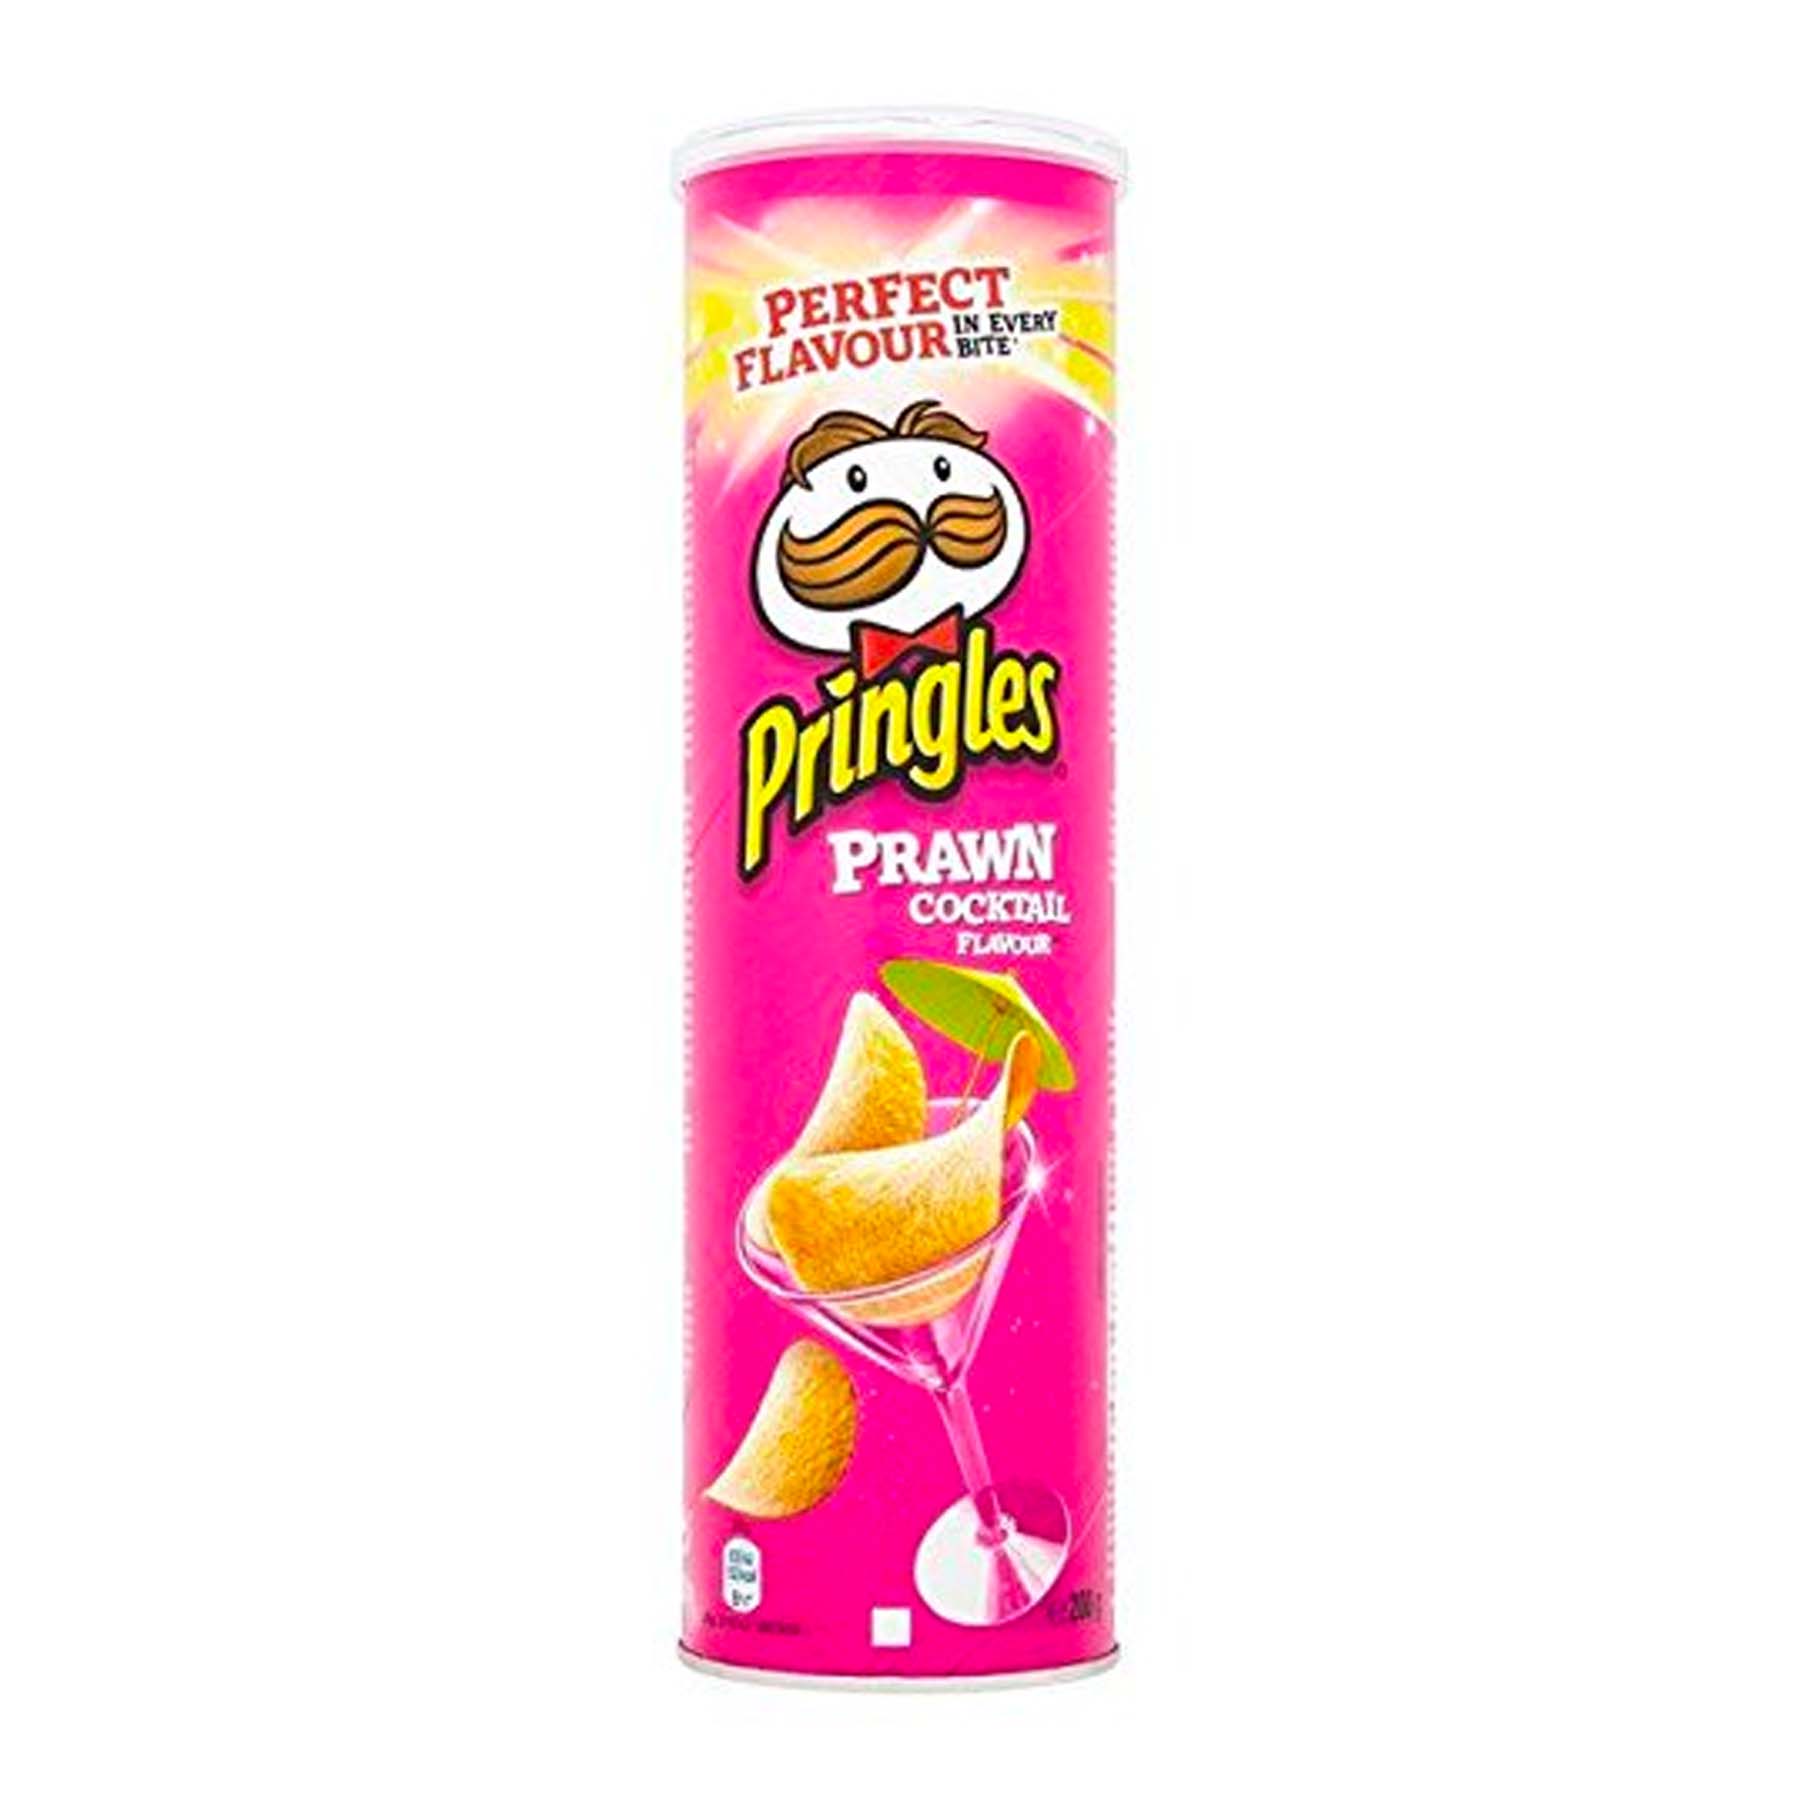 https://video-images.vice.com//products/6360019a18e0340093213560/gallery-image/1667236250686-best-gifts-under-20-dollars-2022-pringles-prawn-cocktail.jpeg?crop=1xw:0.5625xh;center,center